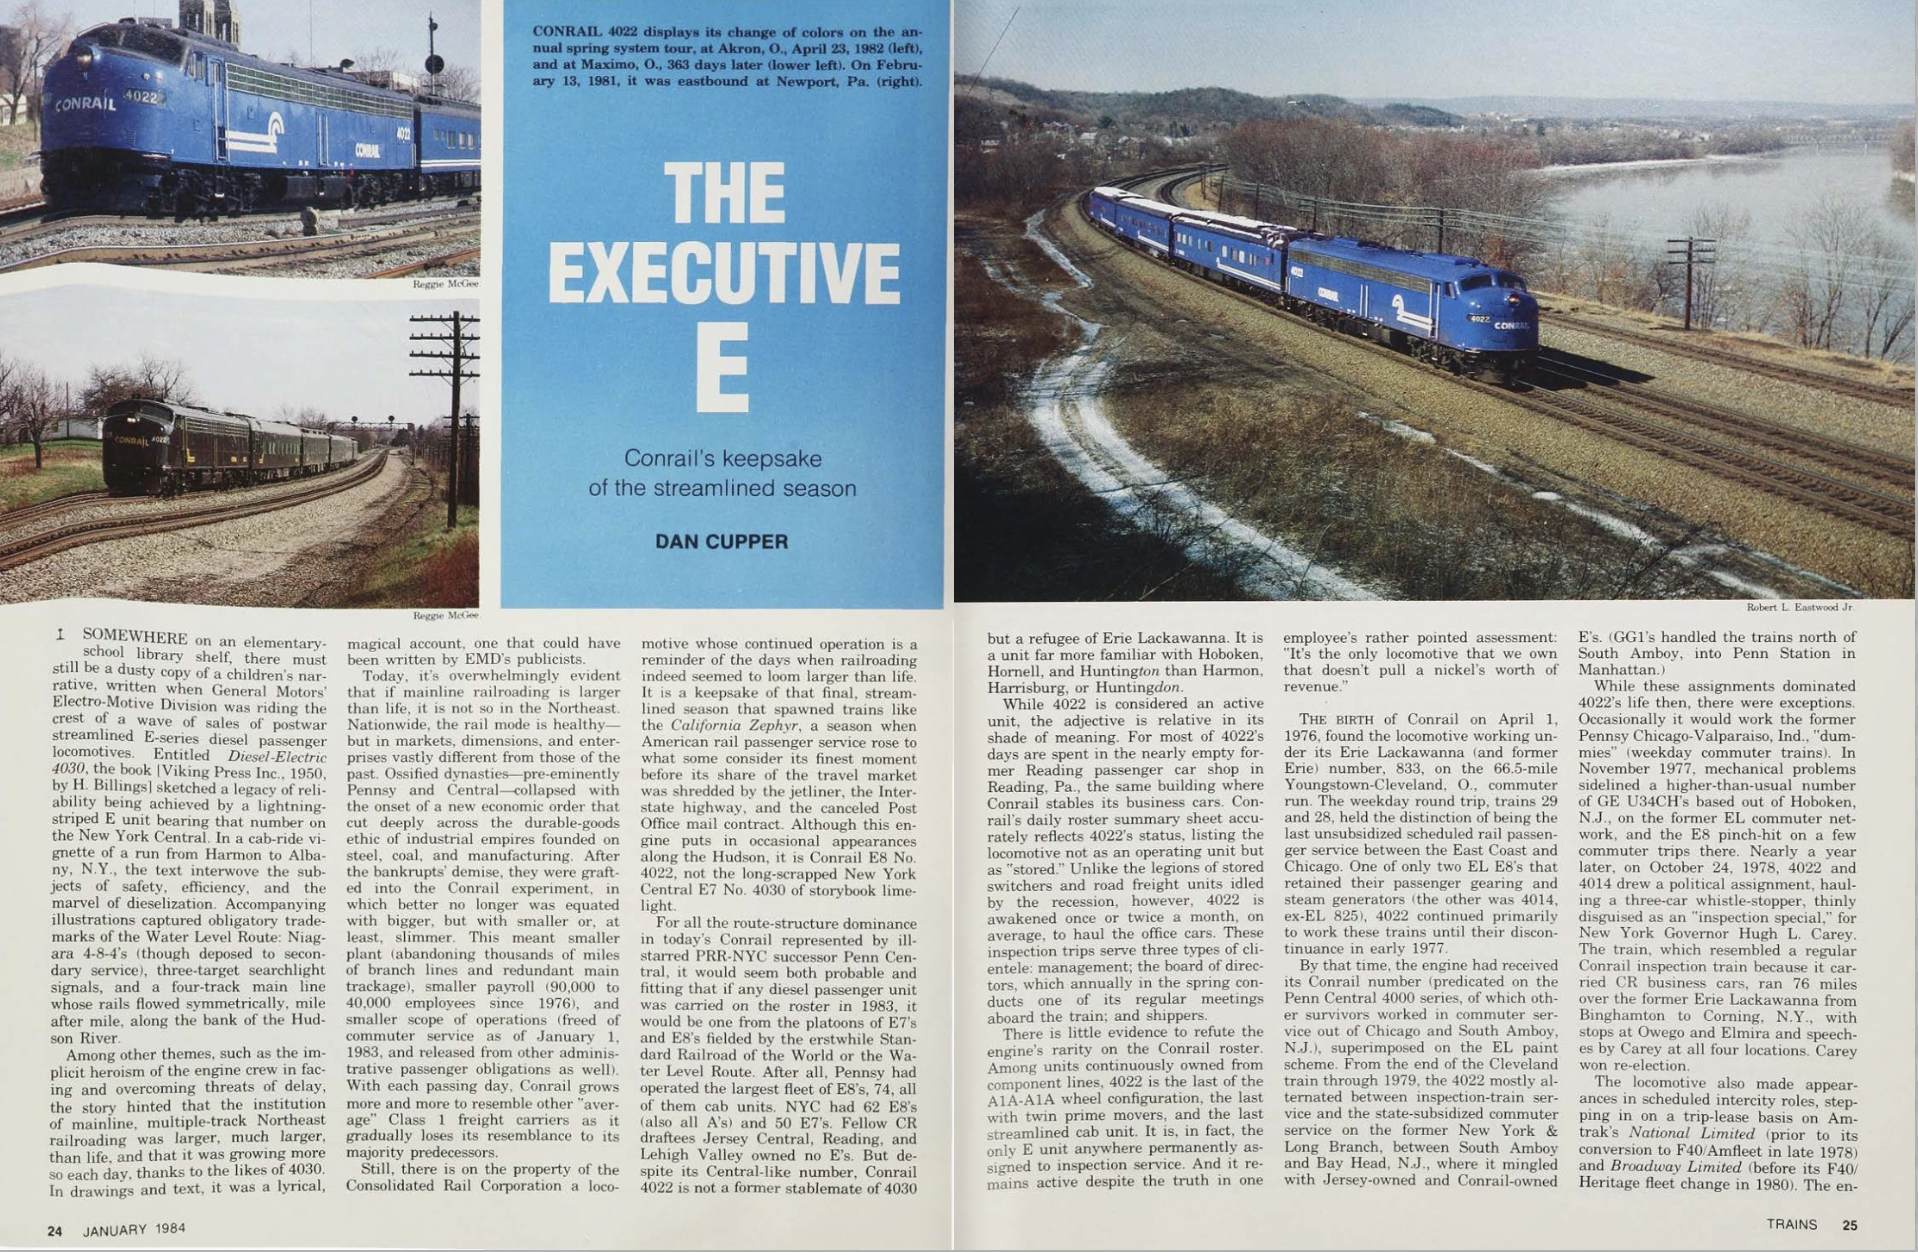 The Executive E spread from the January 1984 issue